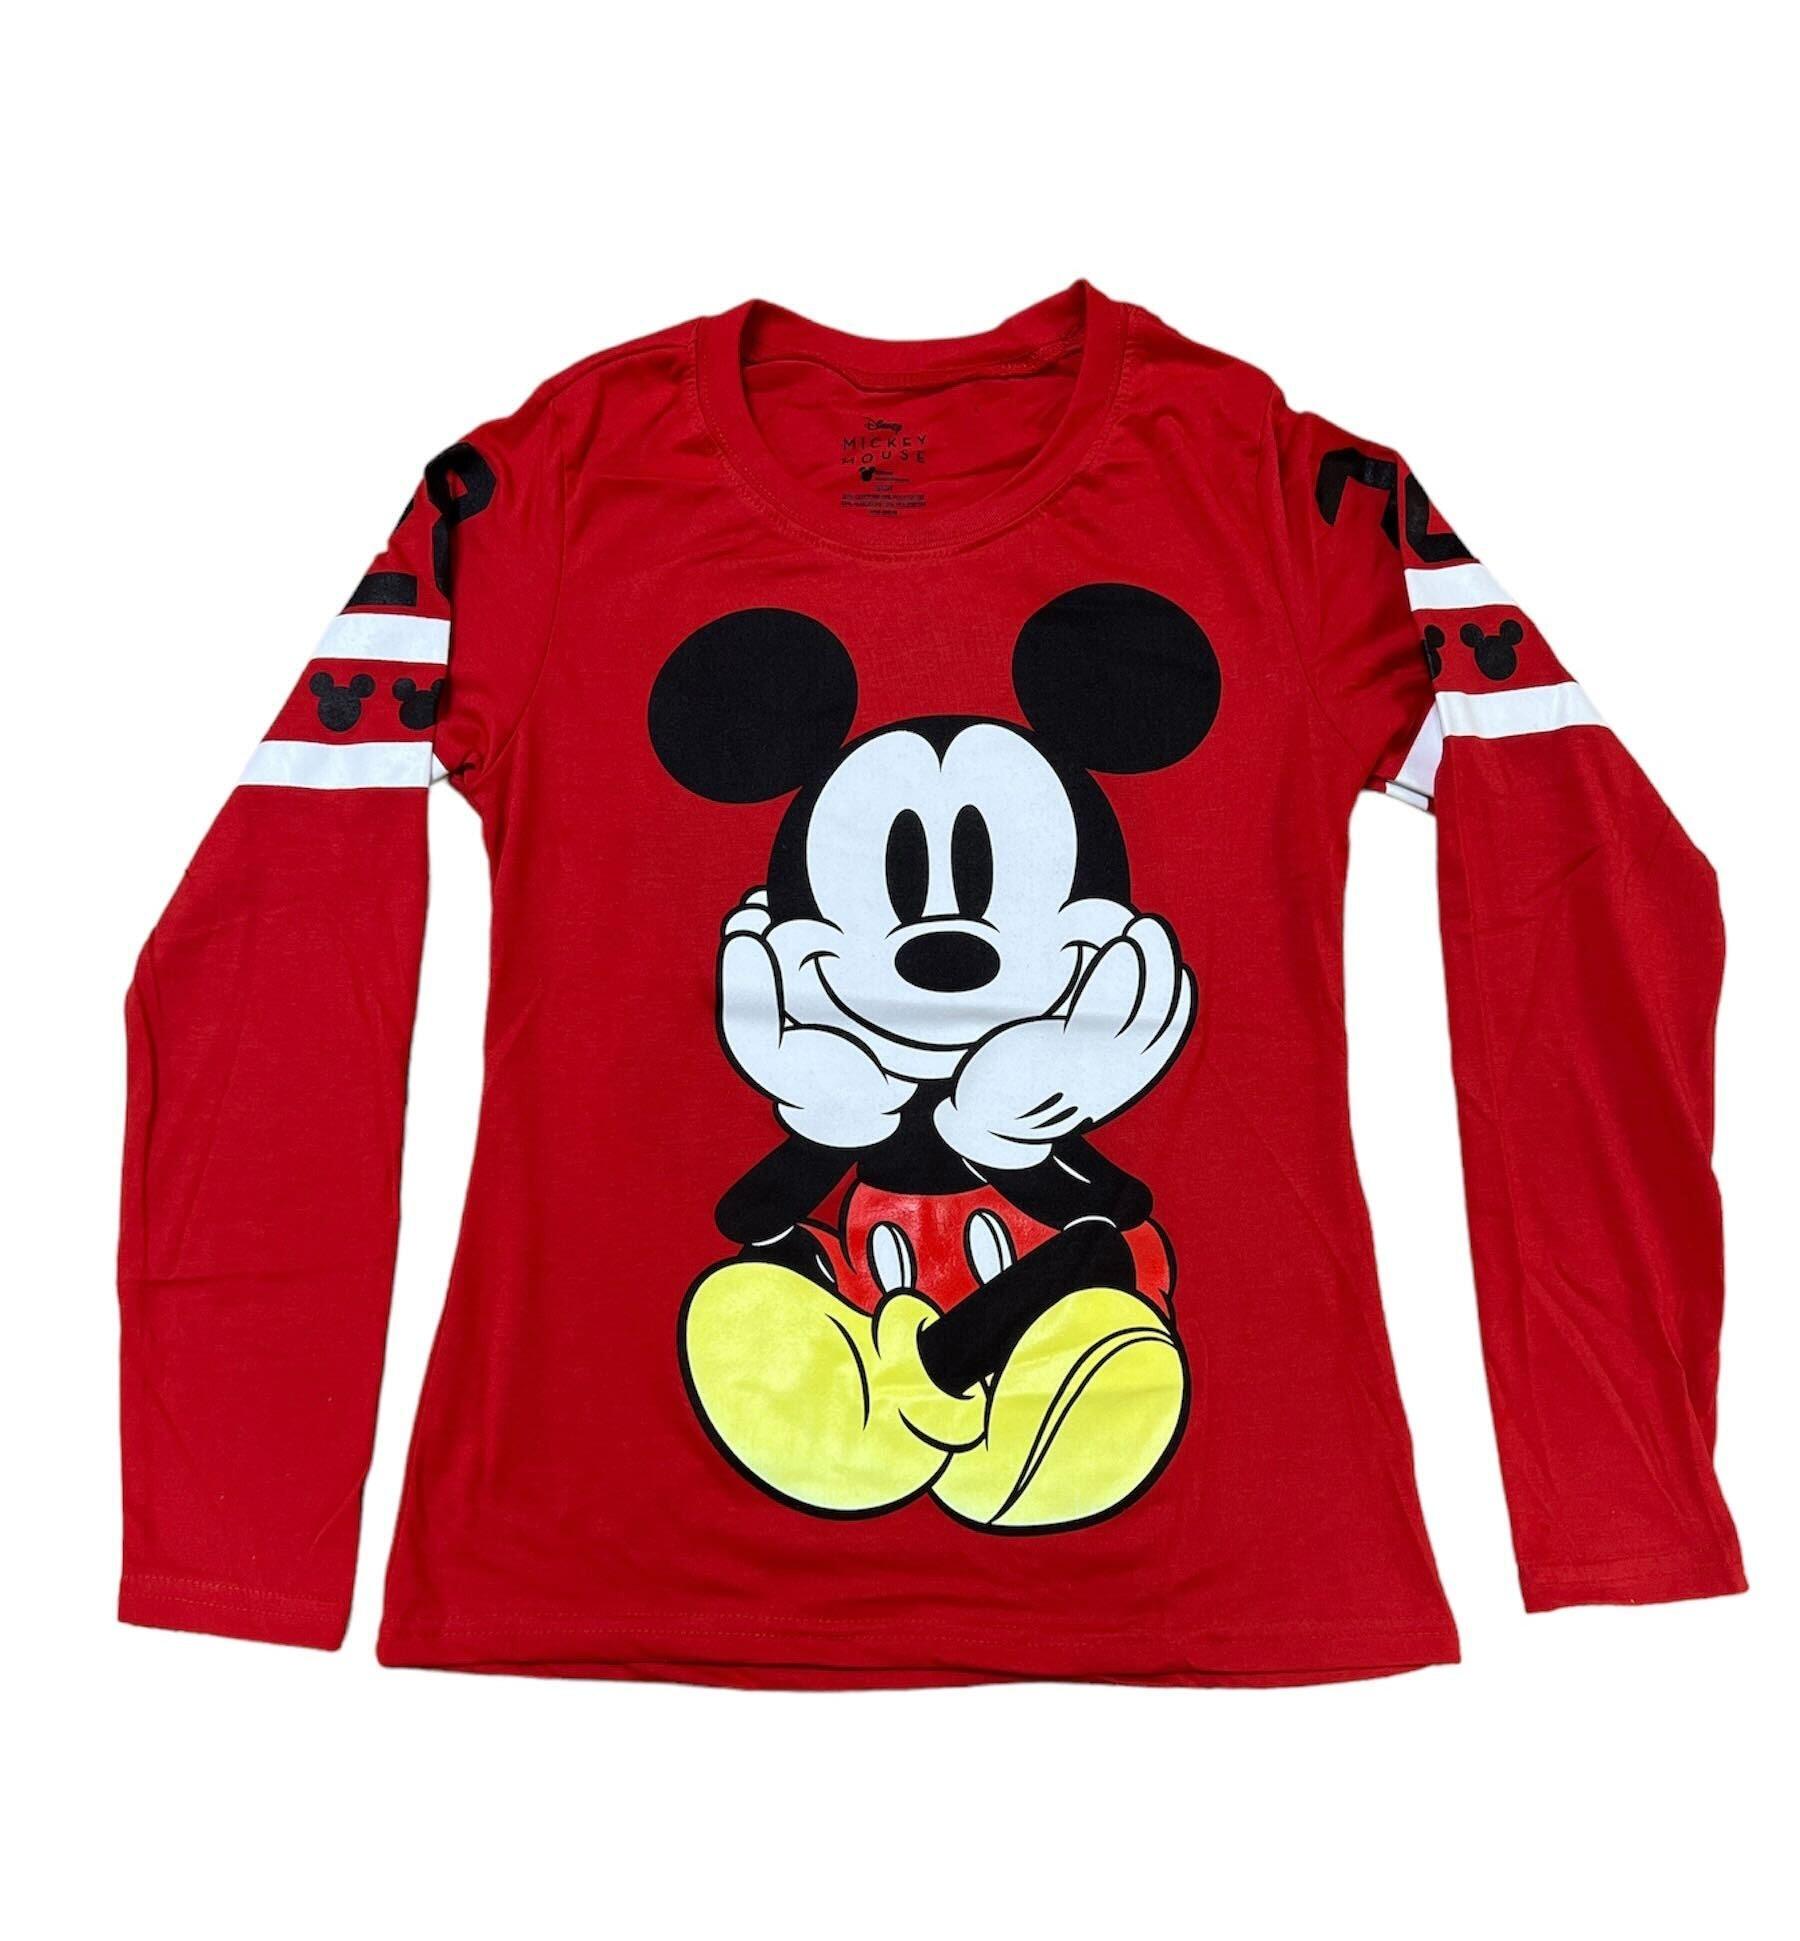 Juniors Disney Mickey Mouse Red Long Sleeve Shirt